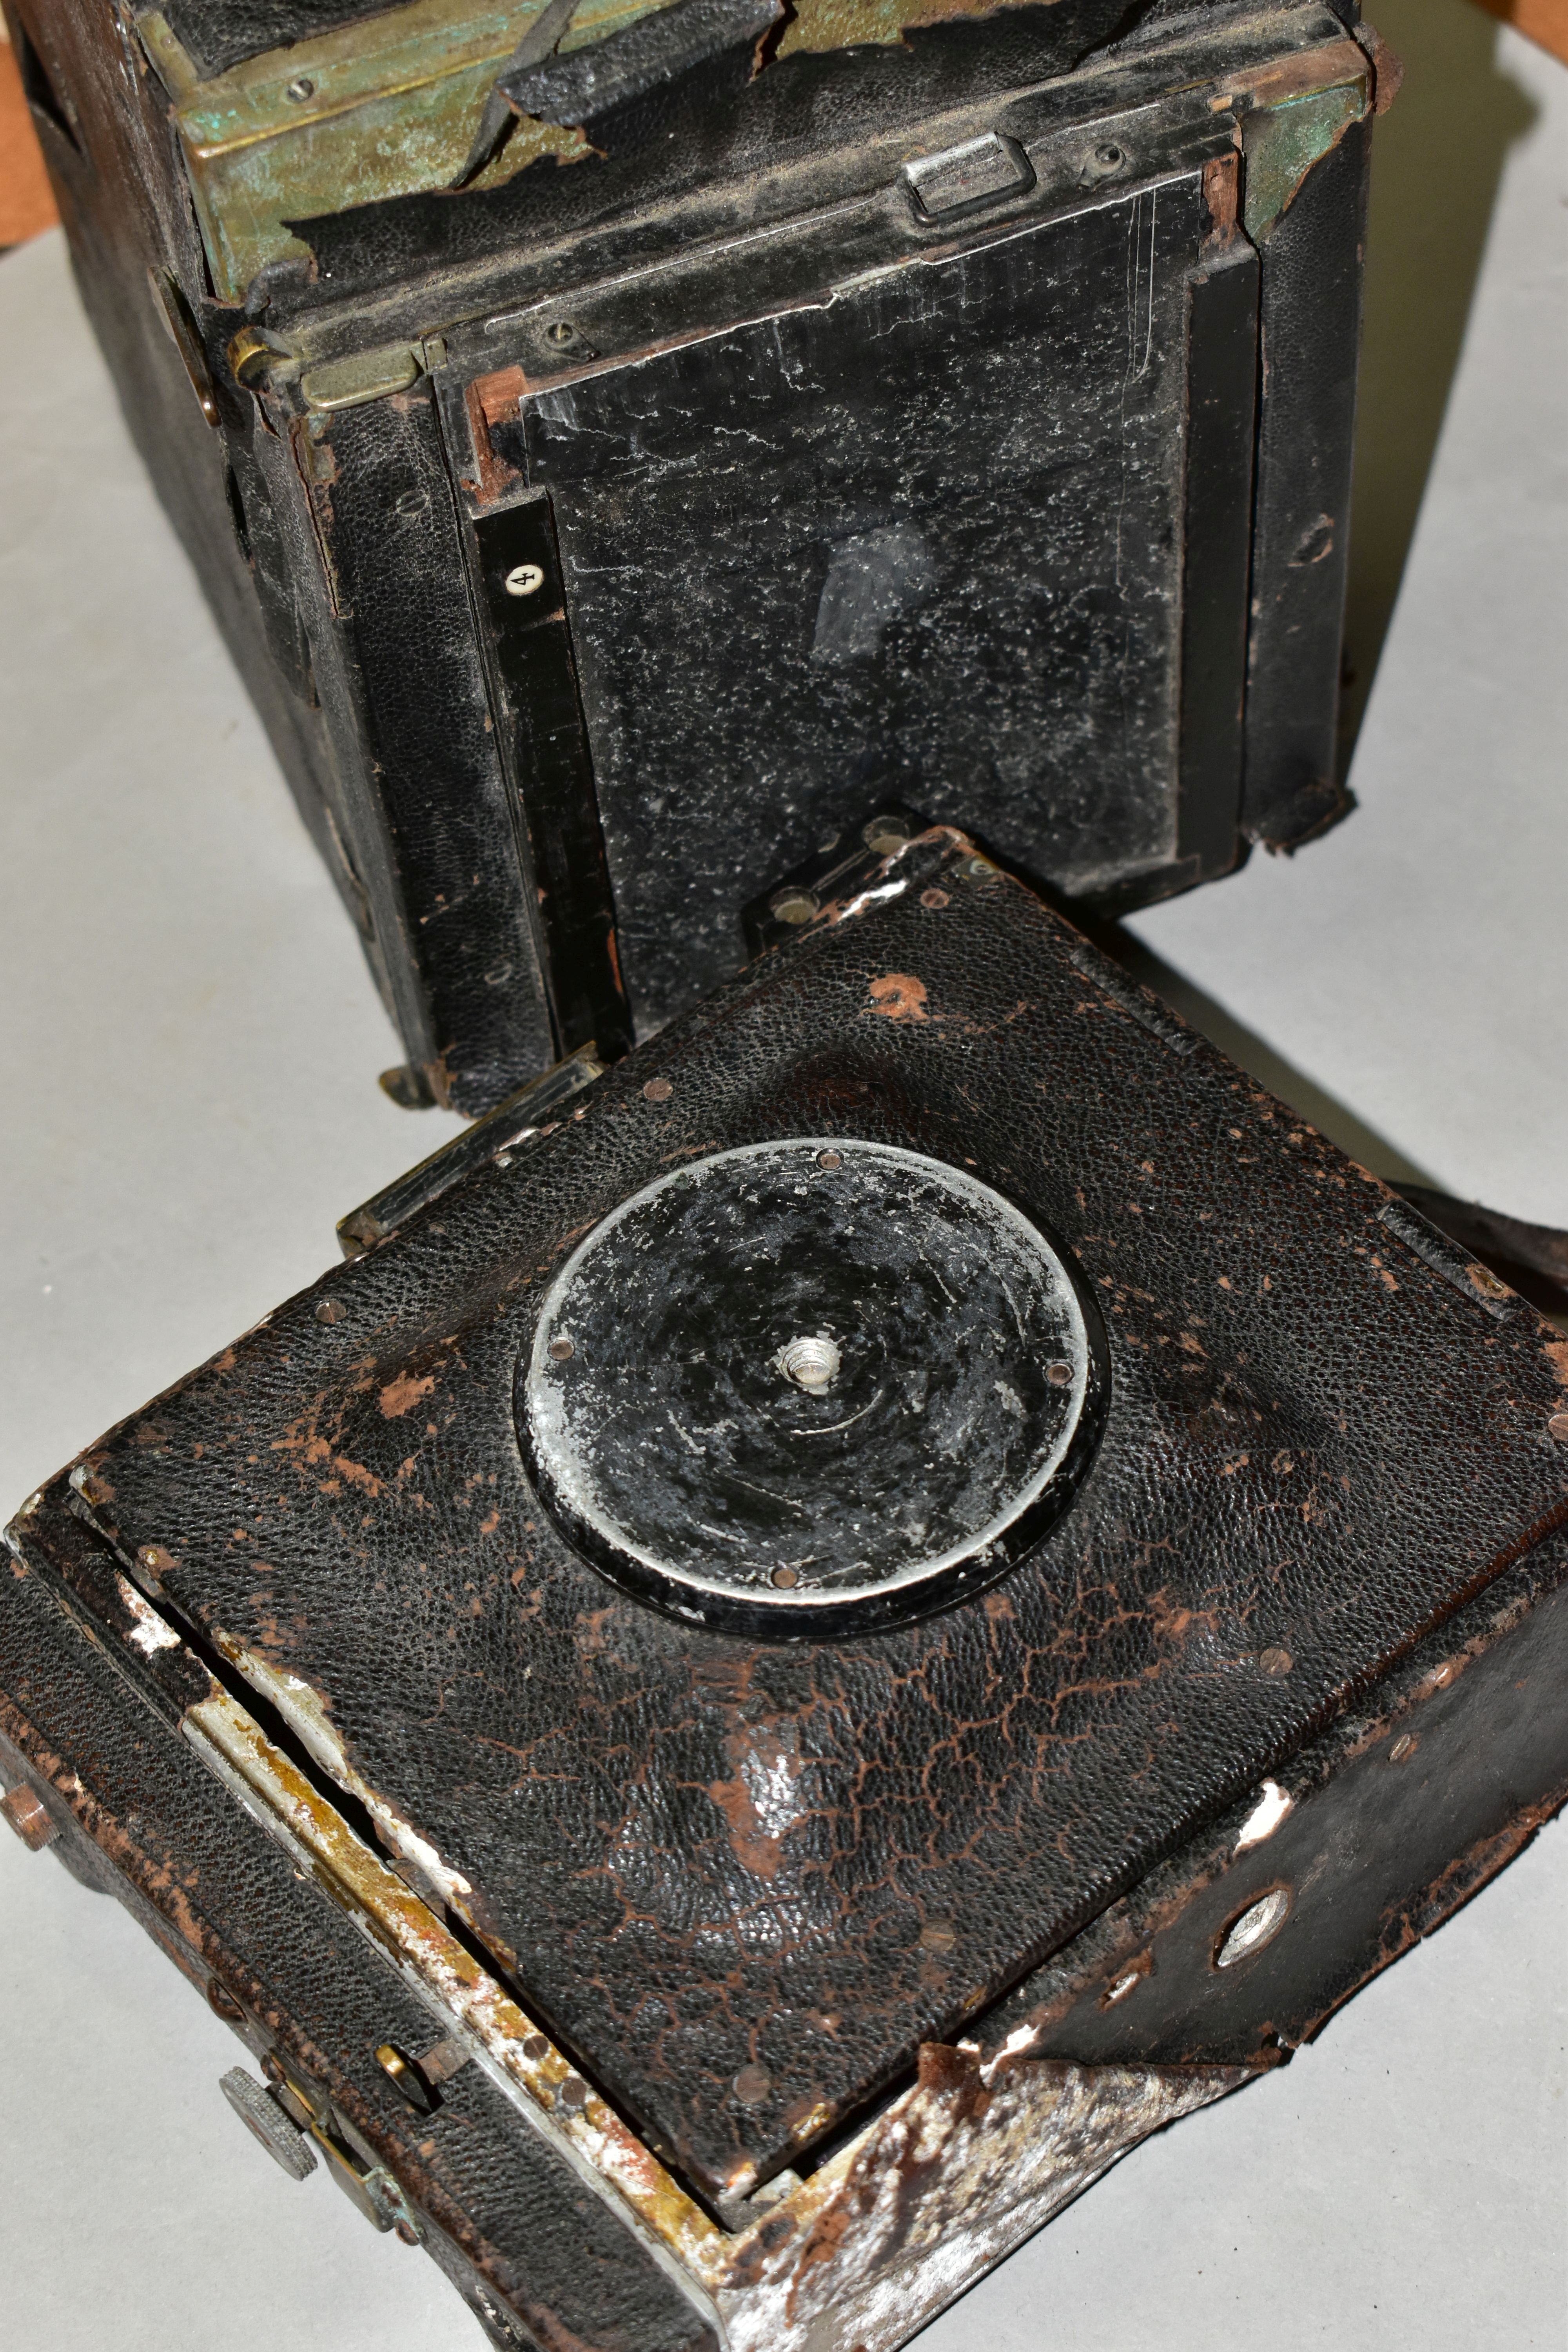 AN ADAMS AND CO MINEX REFLEX DELUXE FILM CAMERA ideal for restoration( no lens or lens carrier), a - Image 7 of 7